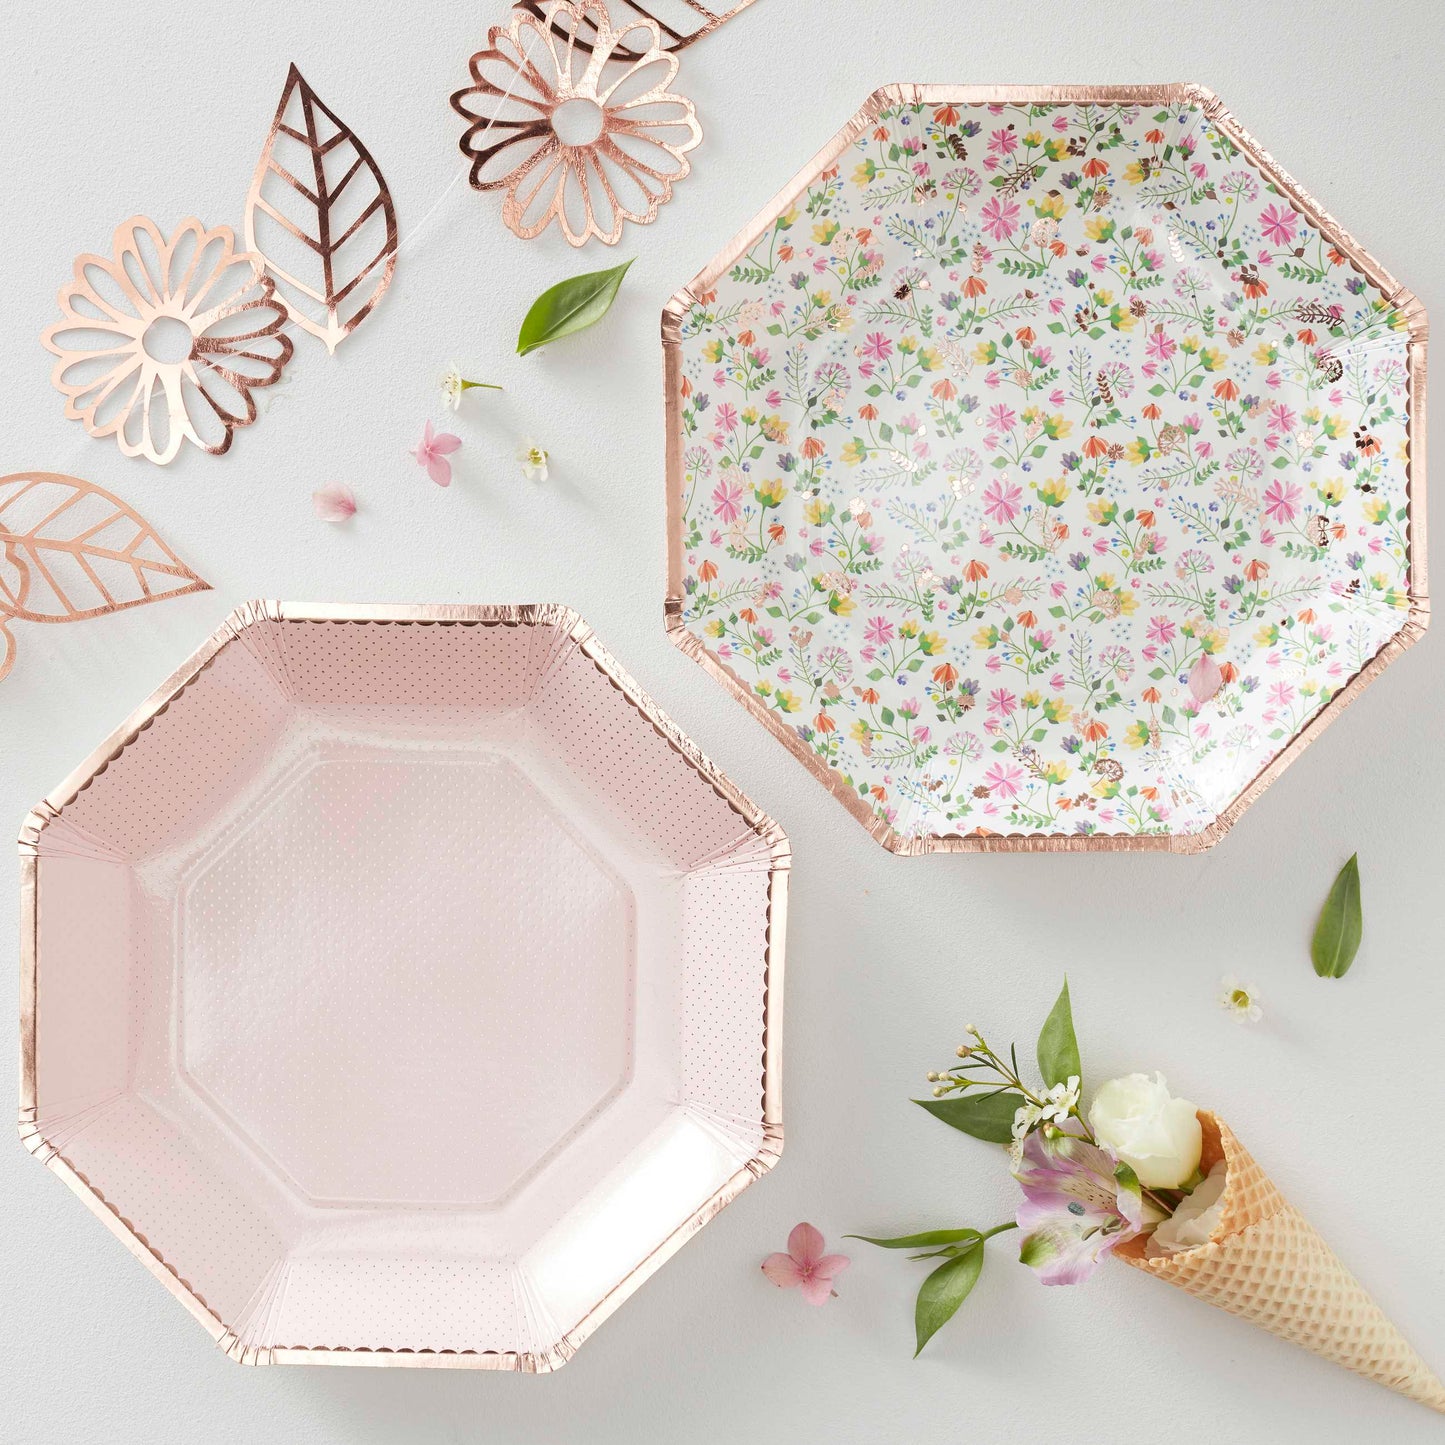 Rose Gold Foiled Paper Floral Plates - Muddy Boots Home UK